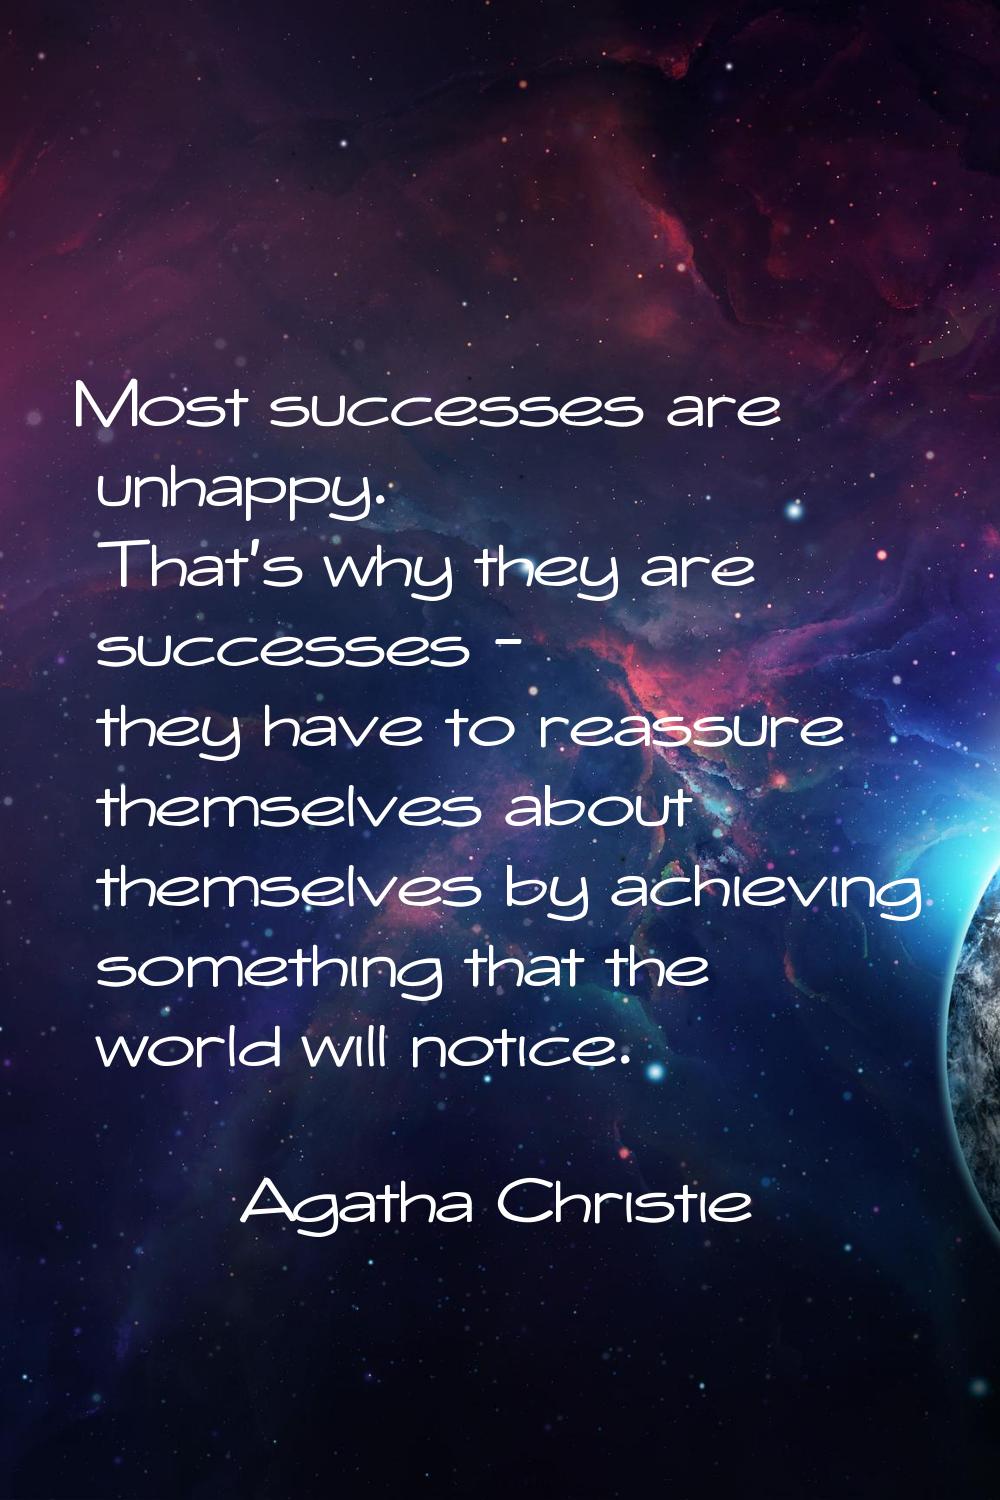 Most successes are unhappy. That's why they are successes - they have to reassure themselves about 